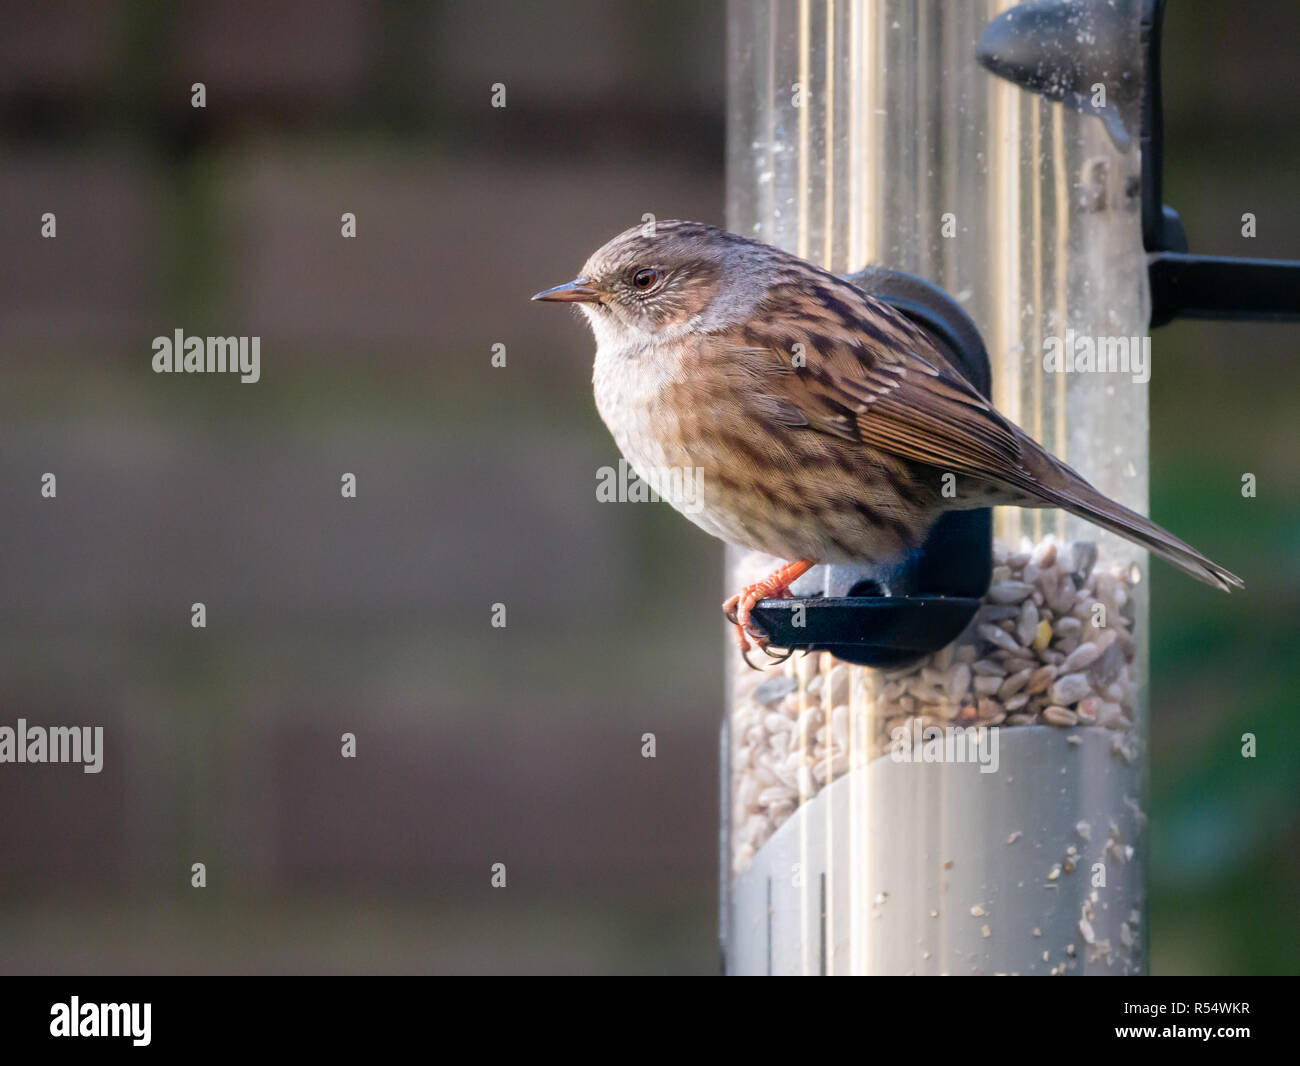 Adult dunnock, Prunella modularis, sitting and looking before eating from tube birdfeeder with seeds Stock Photo